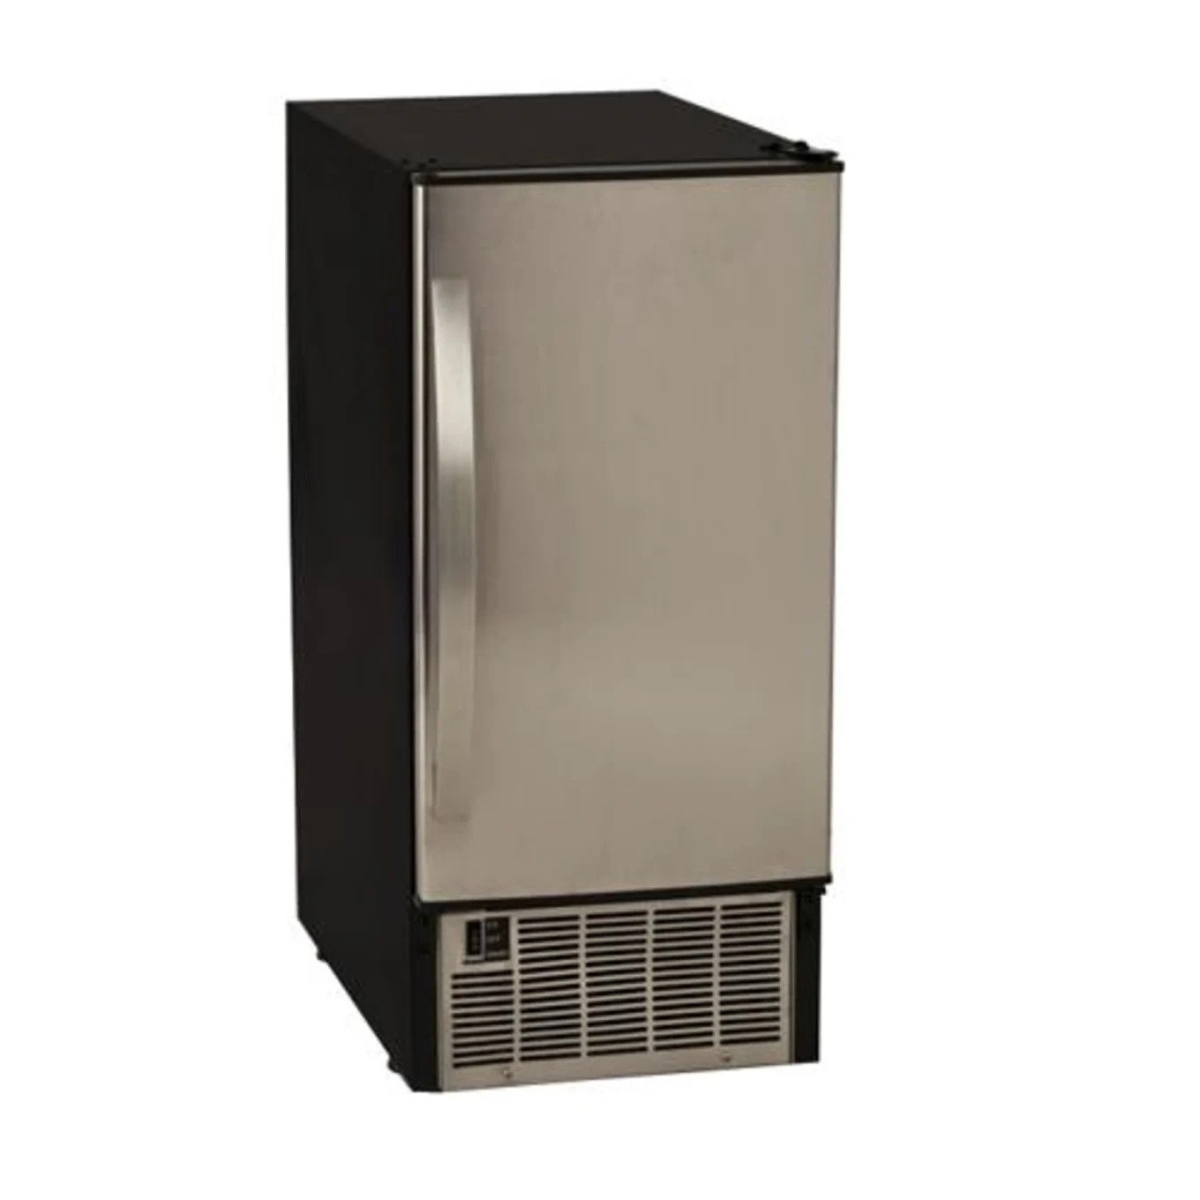 Picture of EdgeStar IB450SS 15 in. Wide 25 lbs Capacity Built-in Ice Maker with 50 lbs Daily Ice Production, Stainless Steel